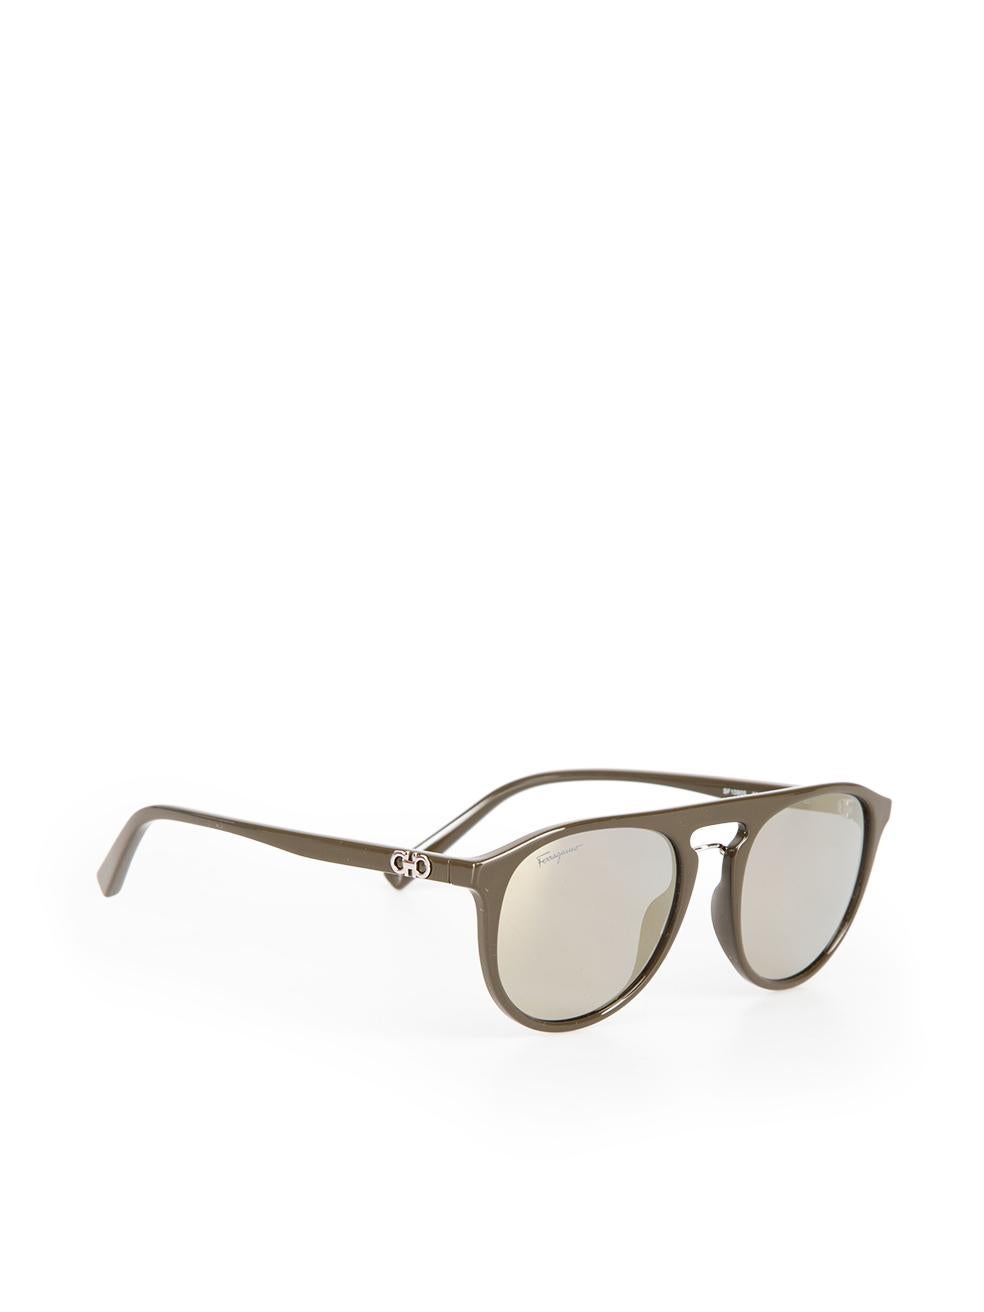 CONDITION is New with tags on this brand new Salvatore Ferragamodesigner item. This item comes with original packaging.
 
 
 
 Details
 
 
 Model: SF1090S
 
 Dark Khaki
 
 Acetate
 
 Aviator Sunglasses
 
 Grey Mirrored Lens
 
 Full-Rim
 
 100% UV